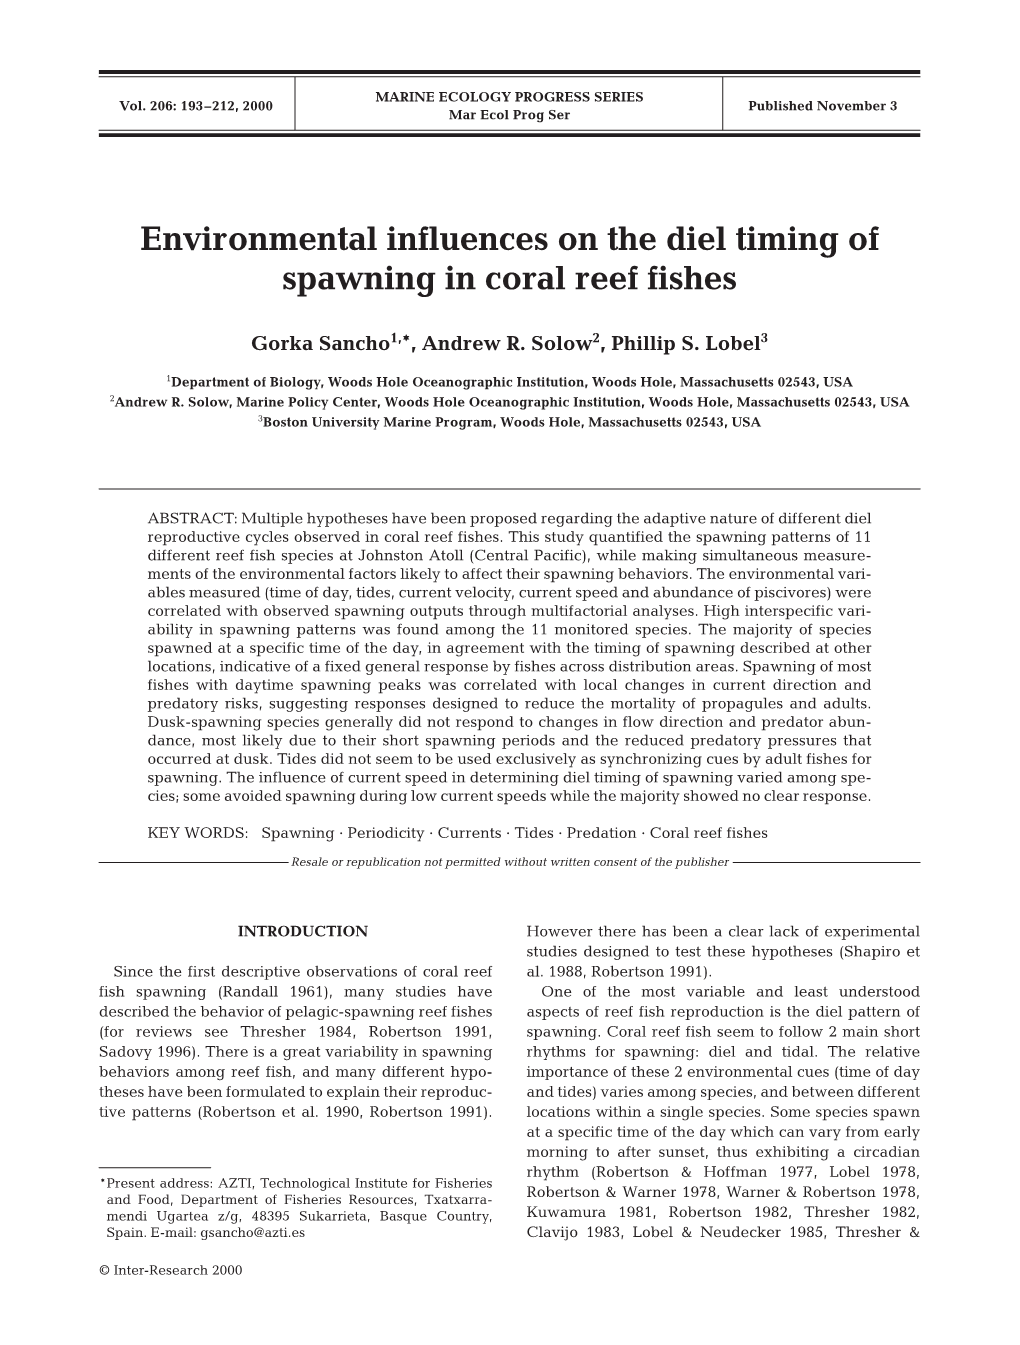 Environmental Influences on the Diel Timing of Spawning in Coral Reef Fishes